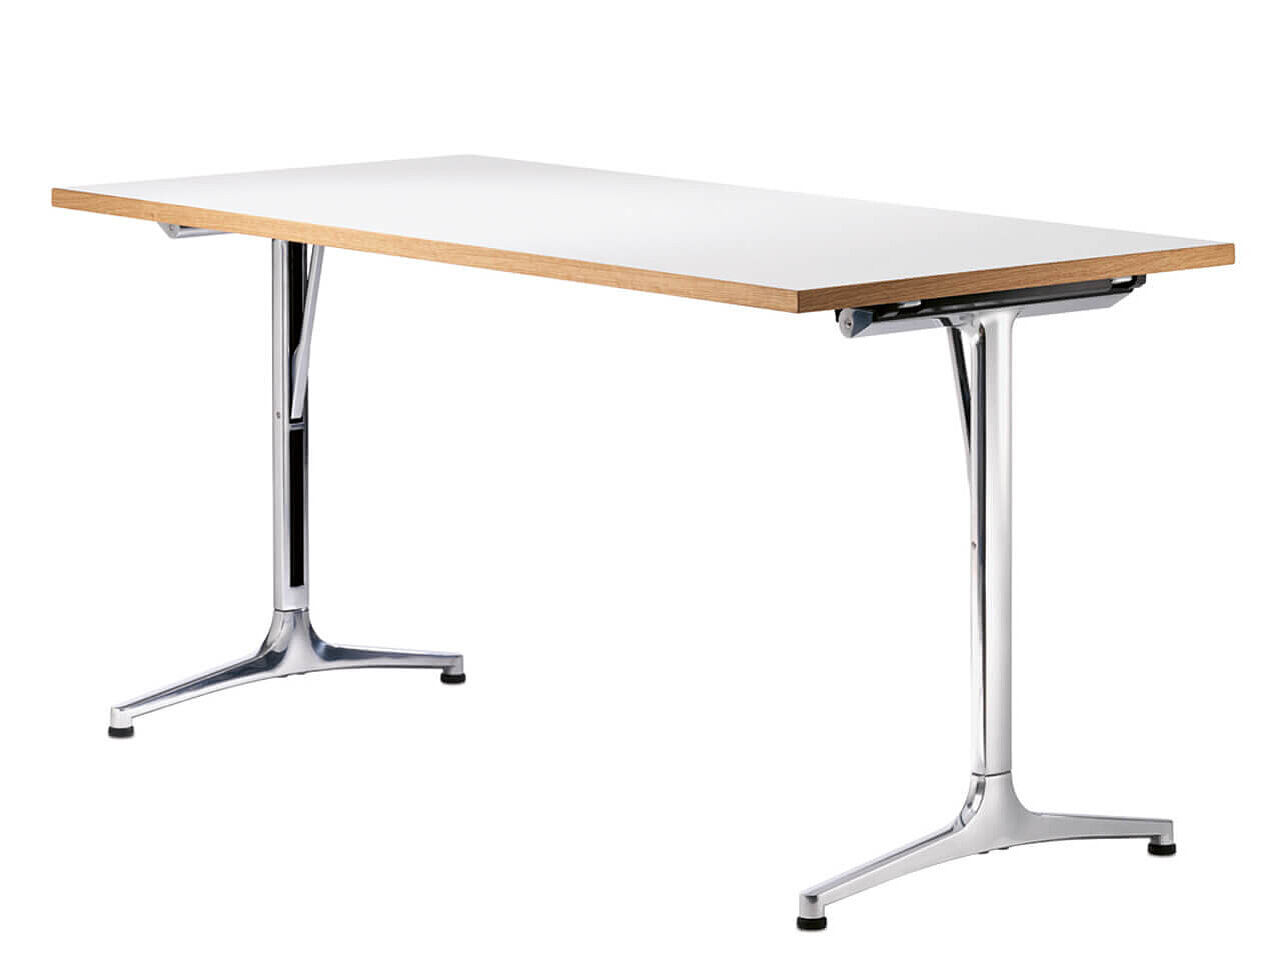 The table “mAx”